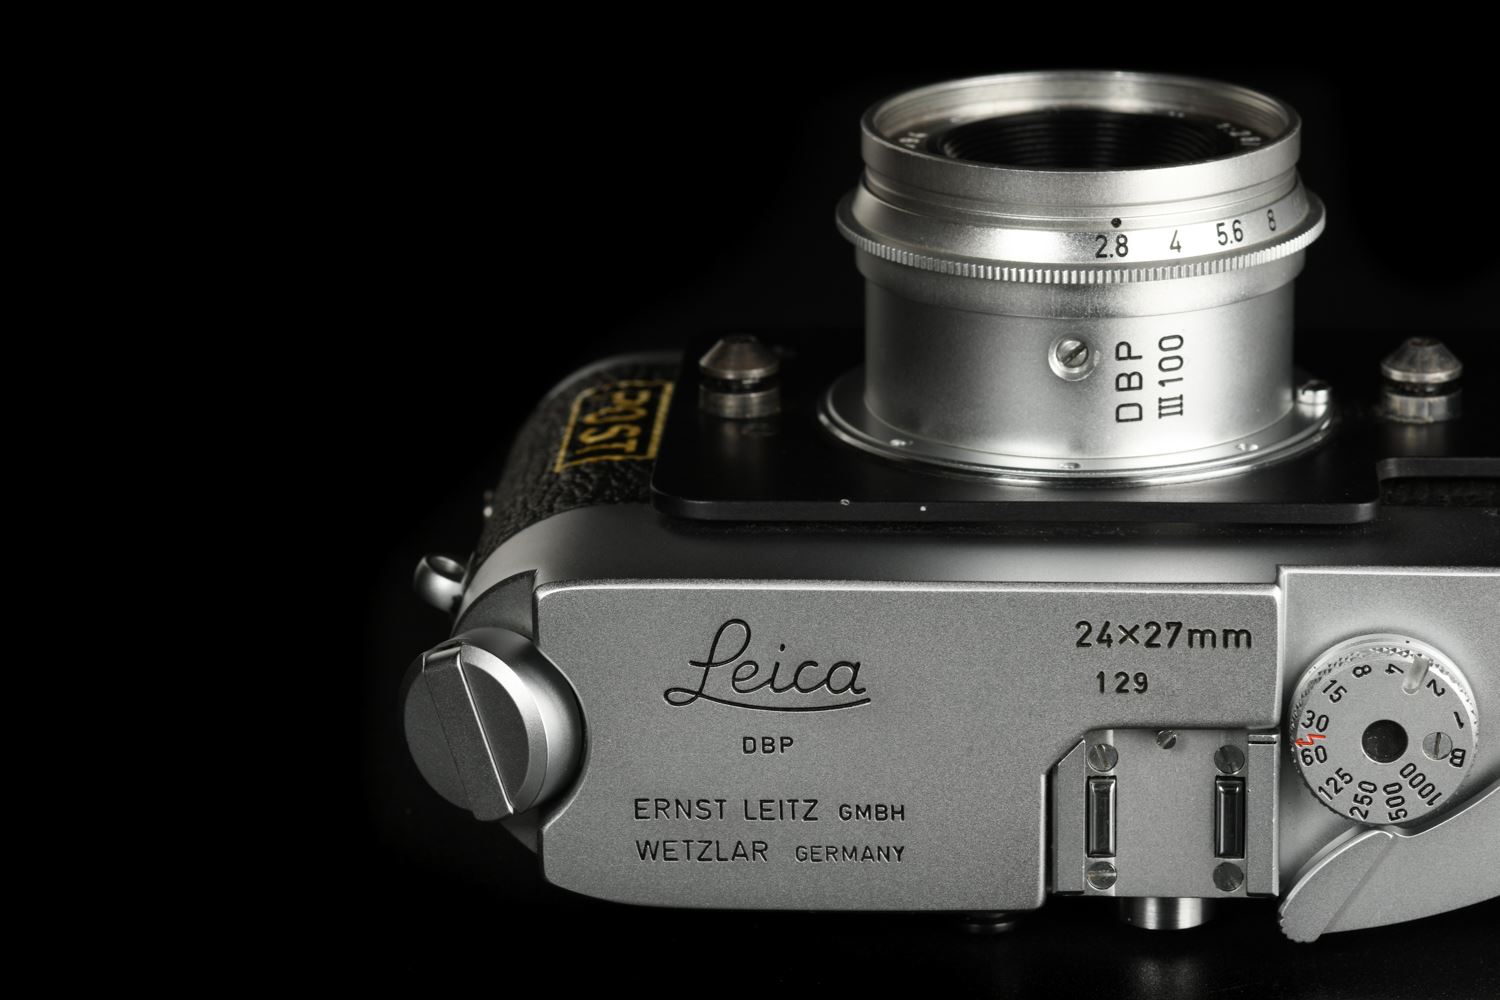 Picture of Leica Mda Post 24x27mm Format with Summaron 35mm f/2.8